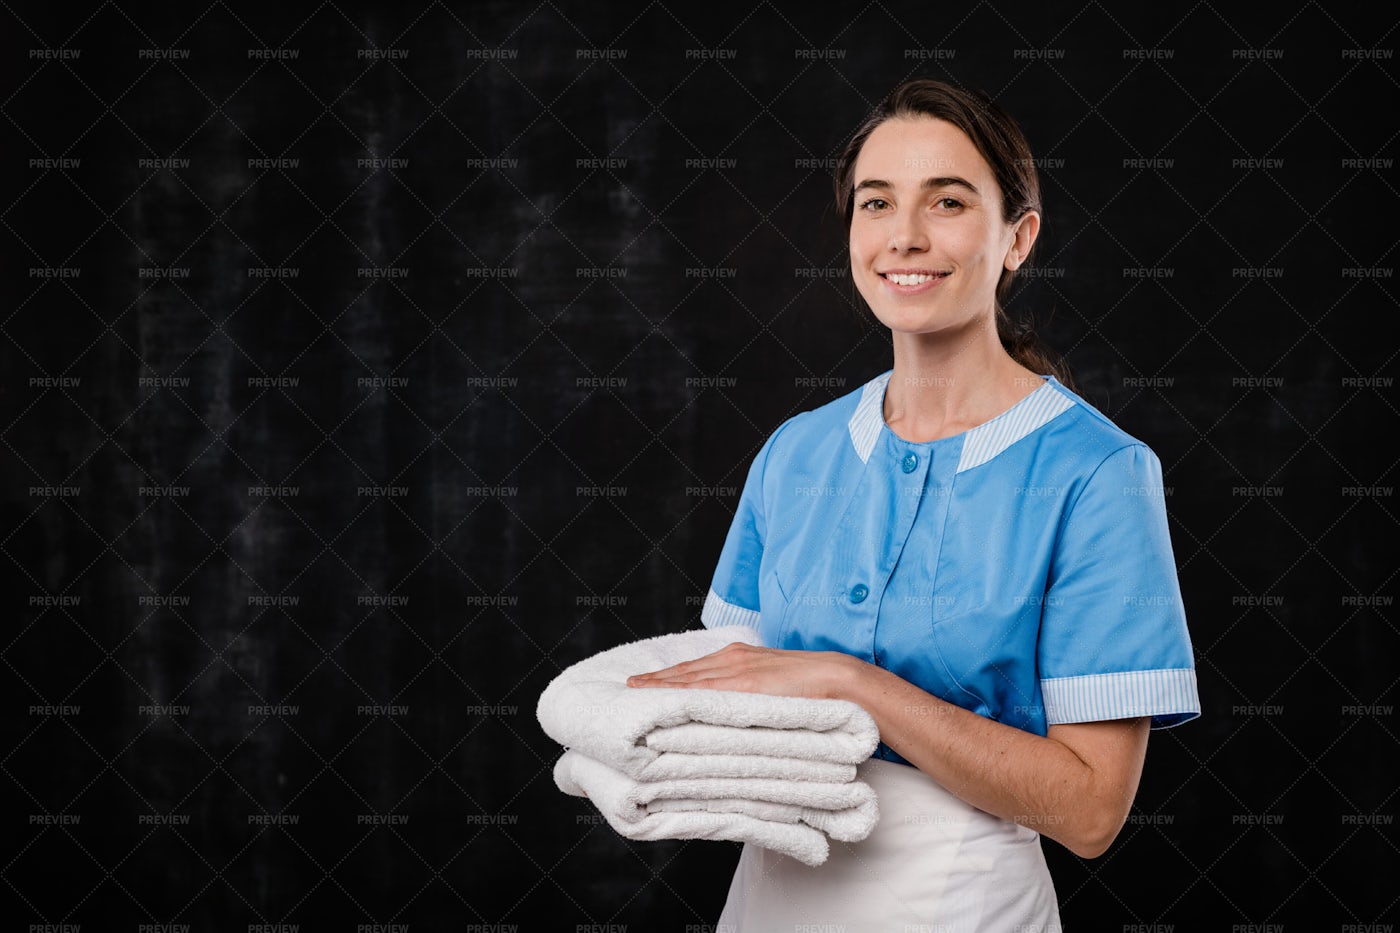 Pretty Young Smiling Hotel Maid...: Stock Photos